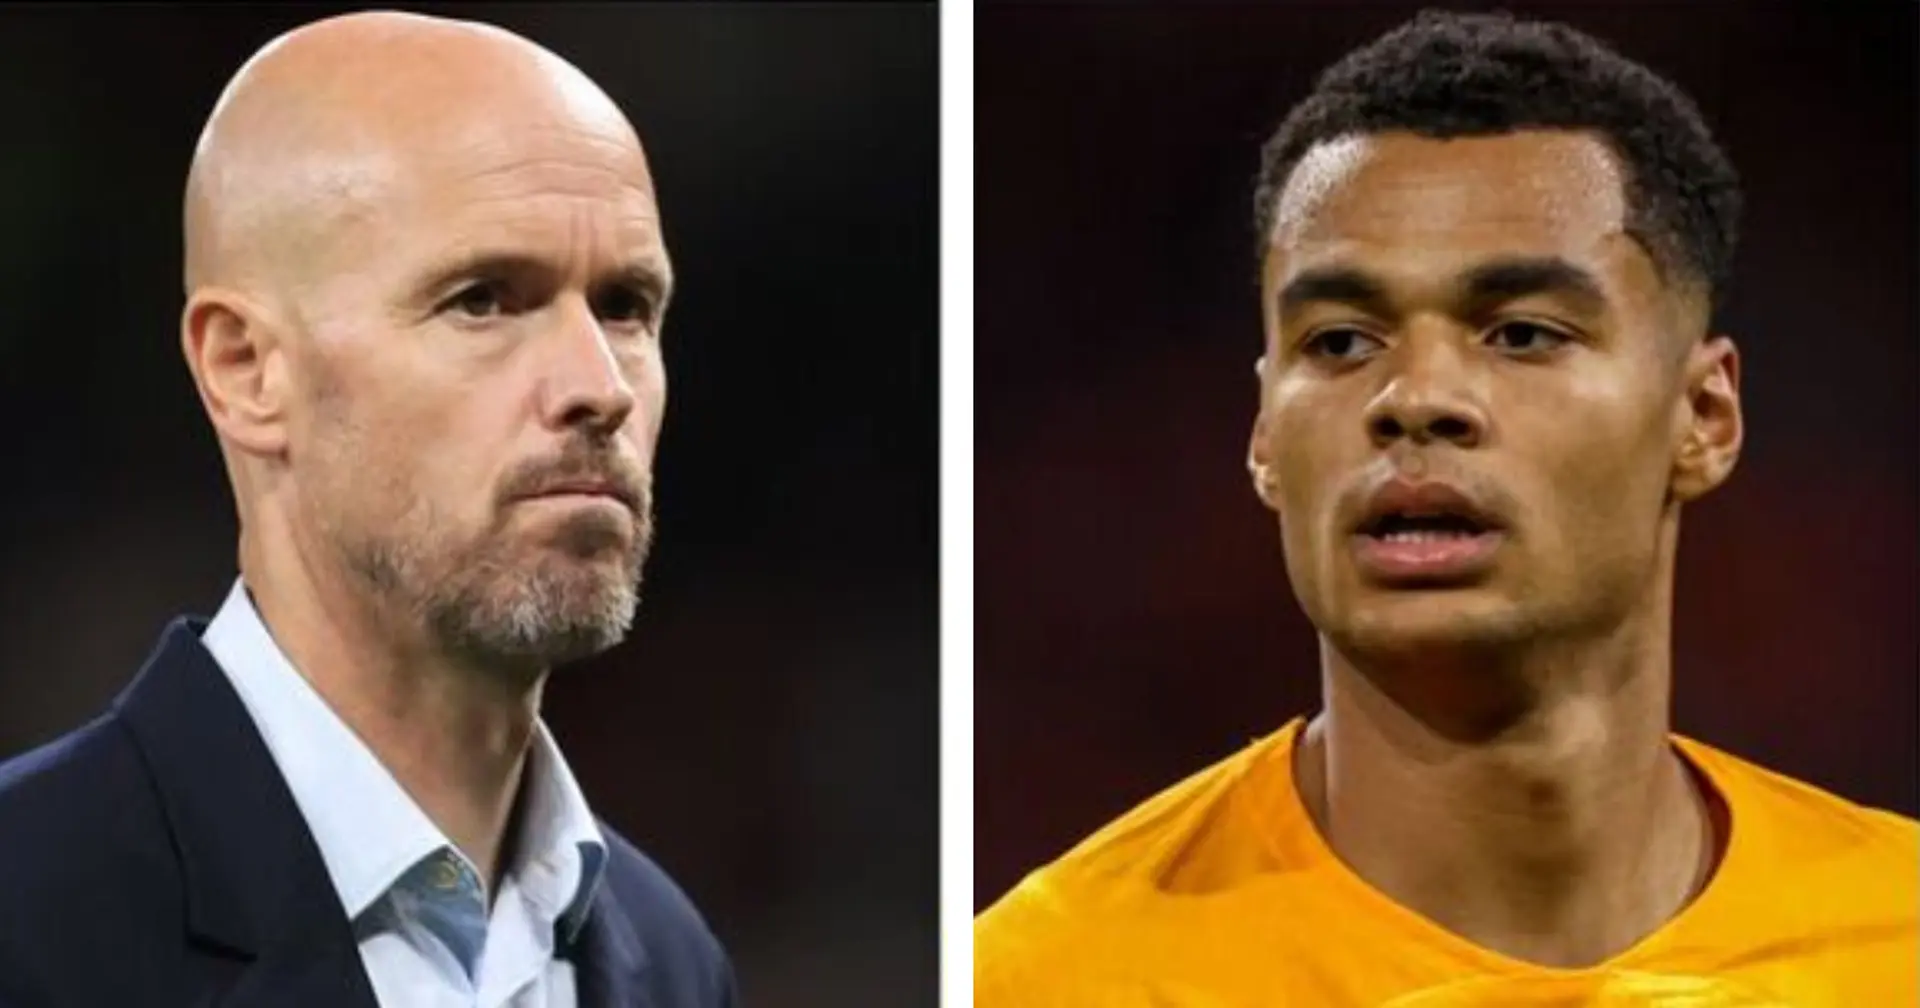 Ten Hag eyes Cody Gakpo transfer & 3 more big Man United stories you might've missed